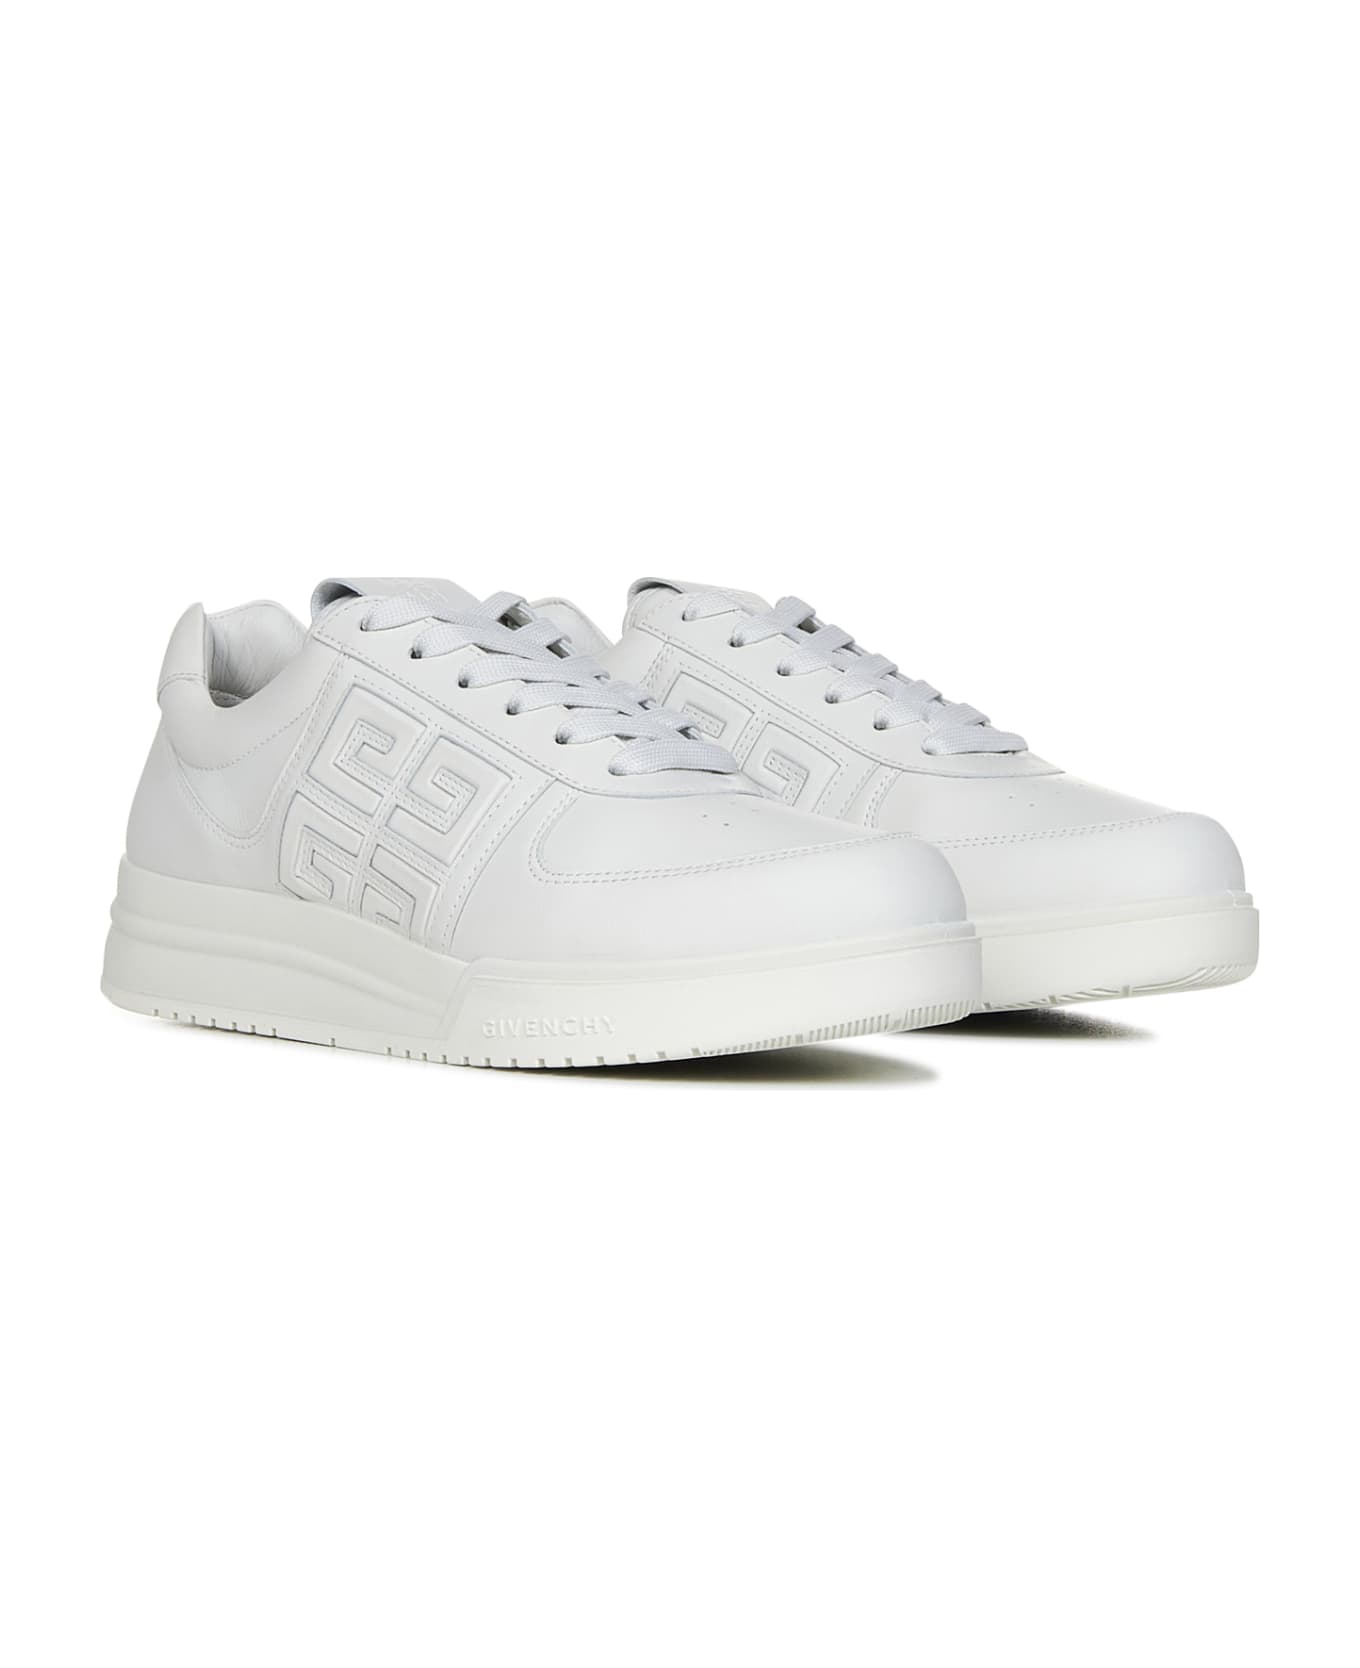 Givenchy 4g Sneakers - White スニーカー